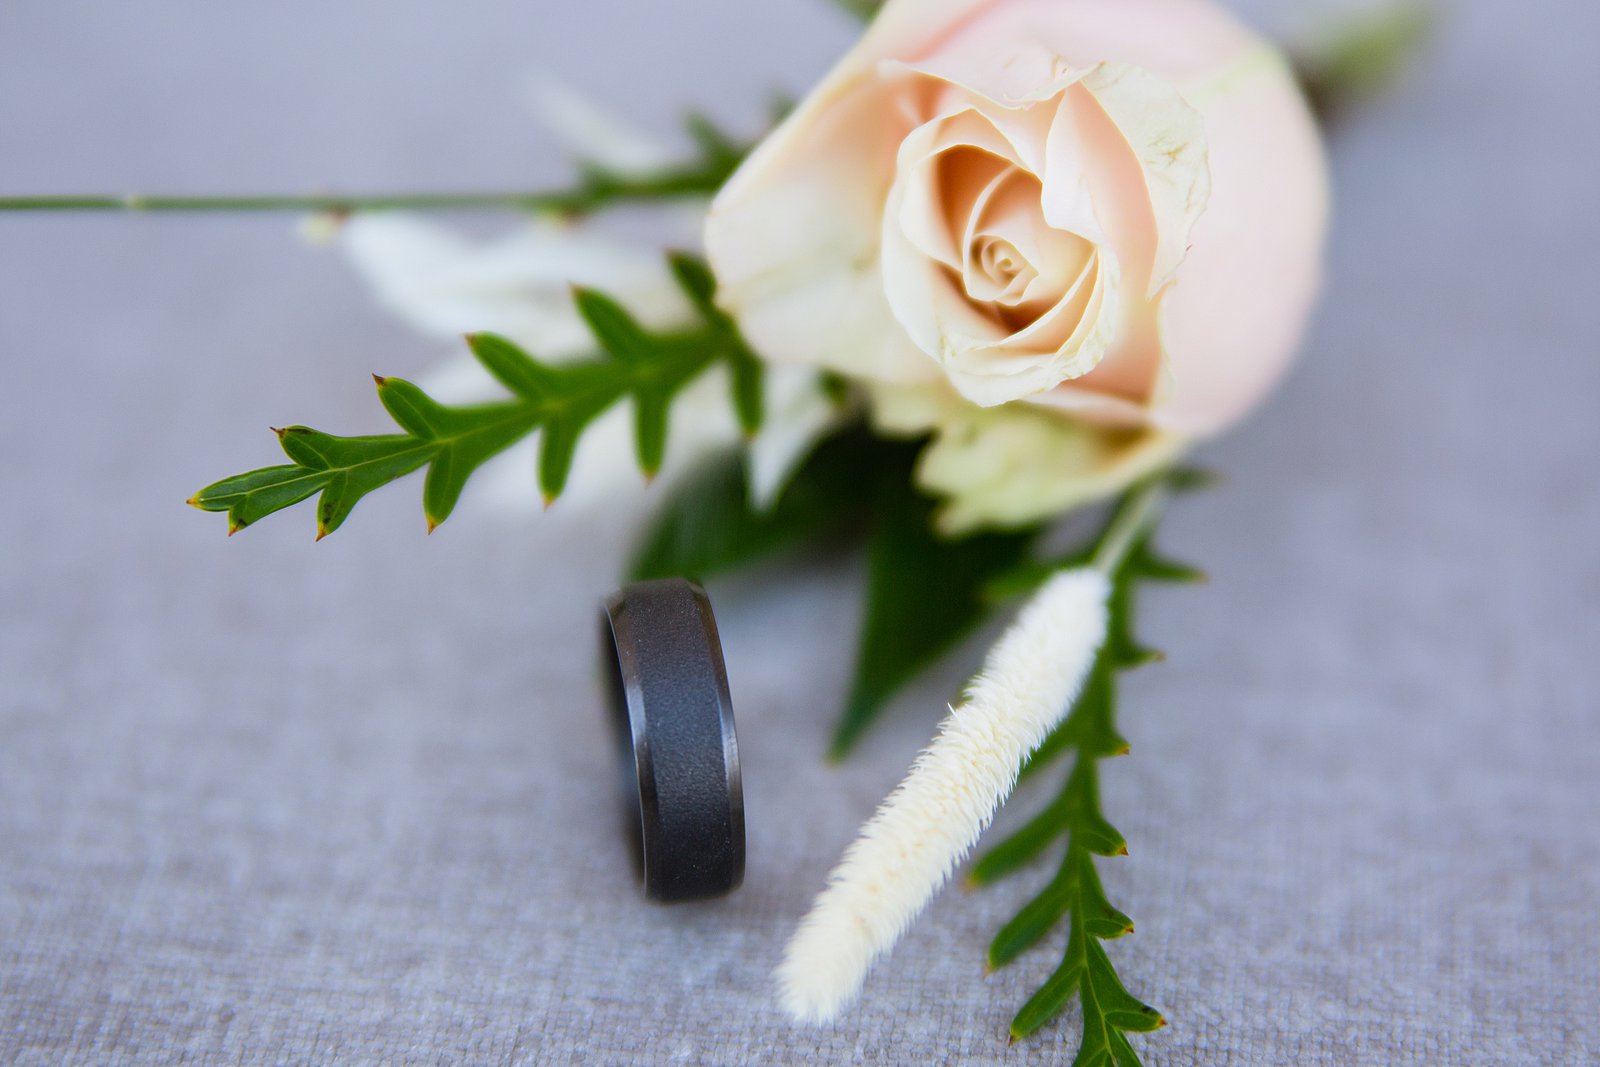 Groom's unique black wedding band and wild rose boutonniere wedding day details by PMA Photography.